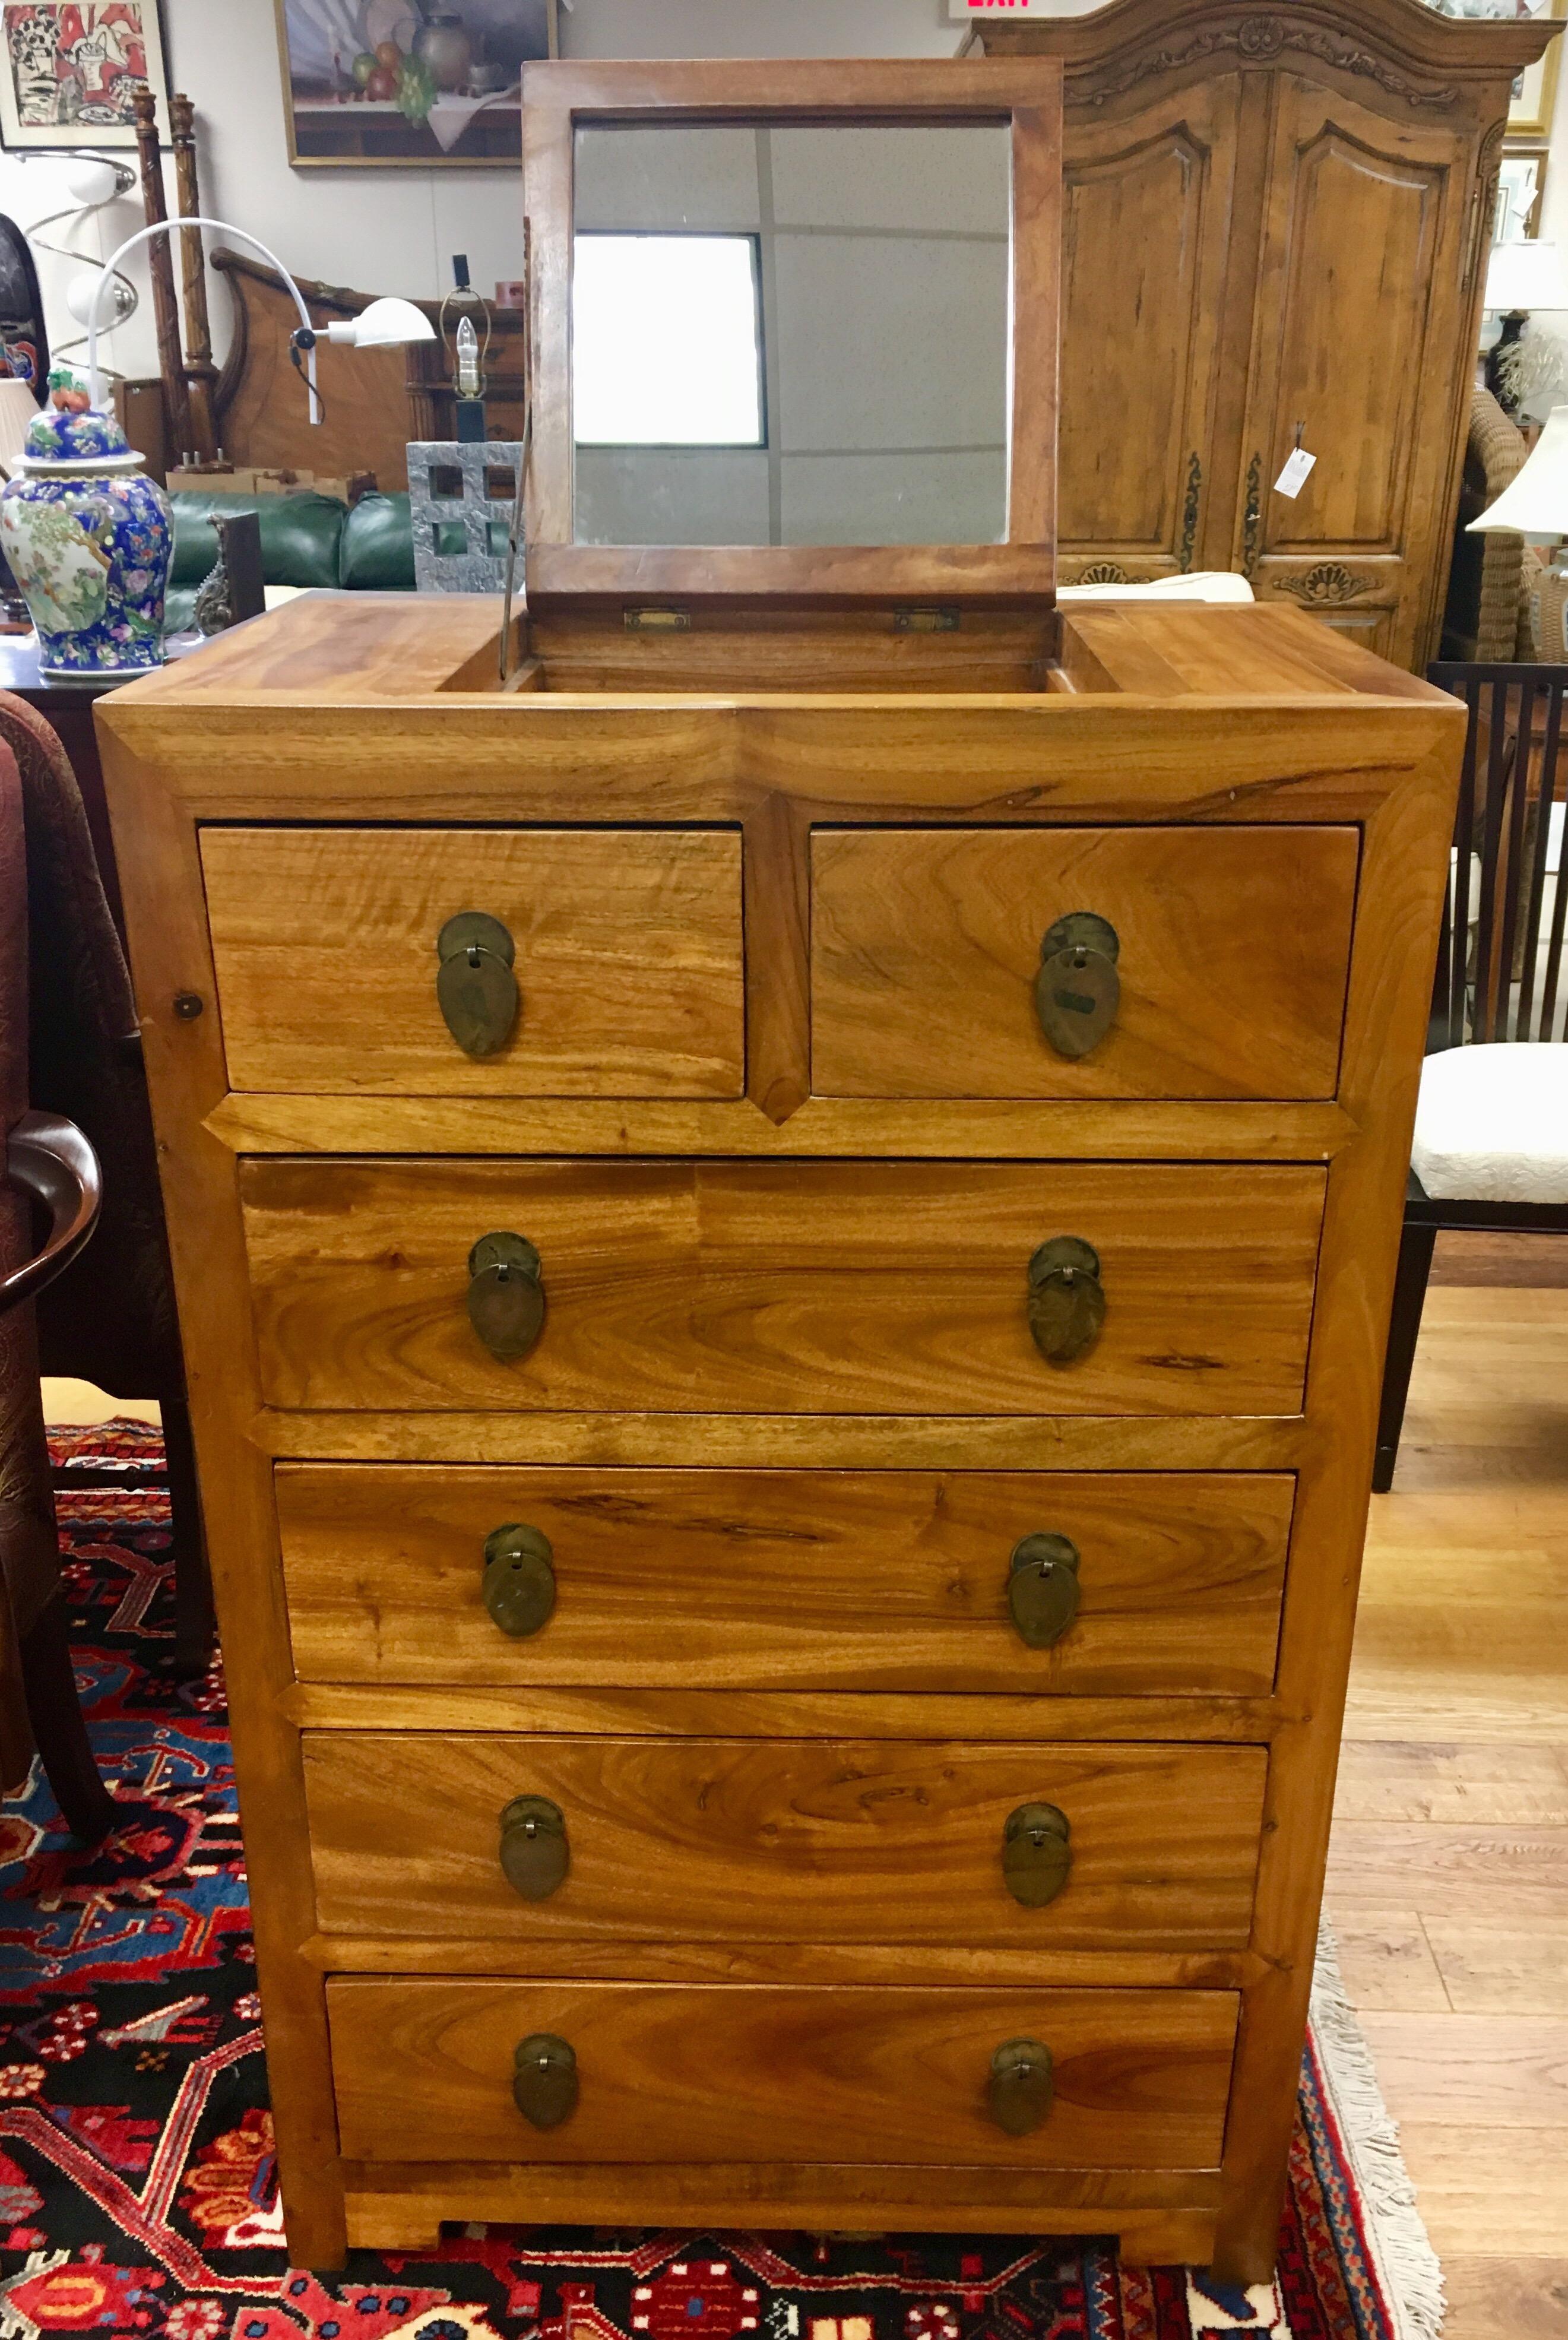 Sumptuous camphor wood British Officer’s chest of drawers with original hardware. What distinguishes this piece is the pop up mirror and camphor wood. Drawers from top to bottom.